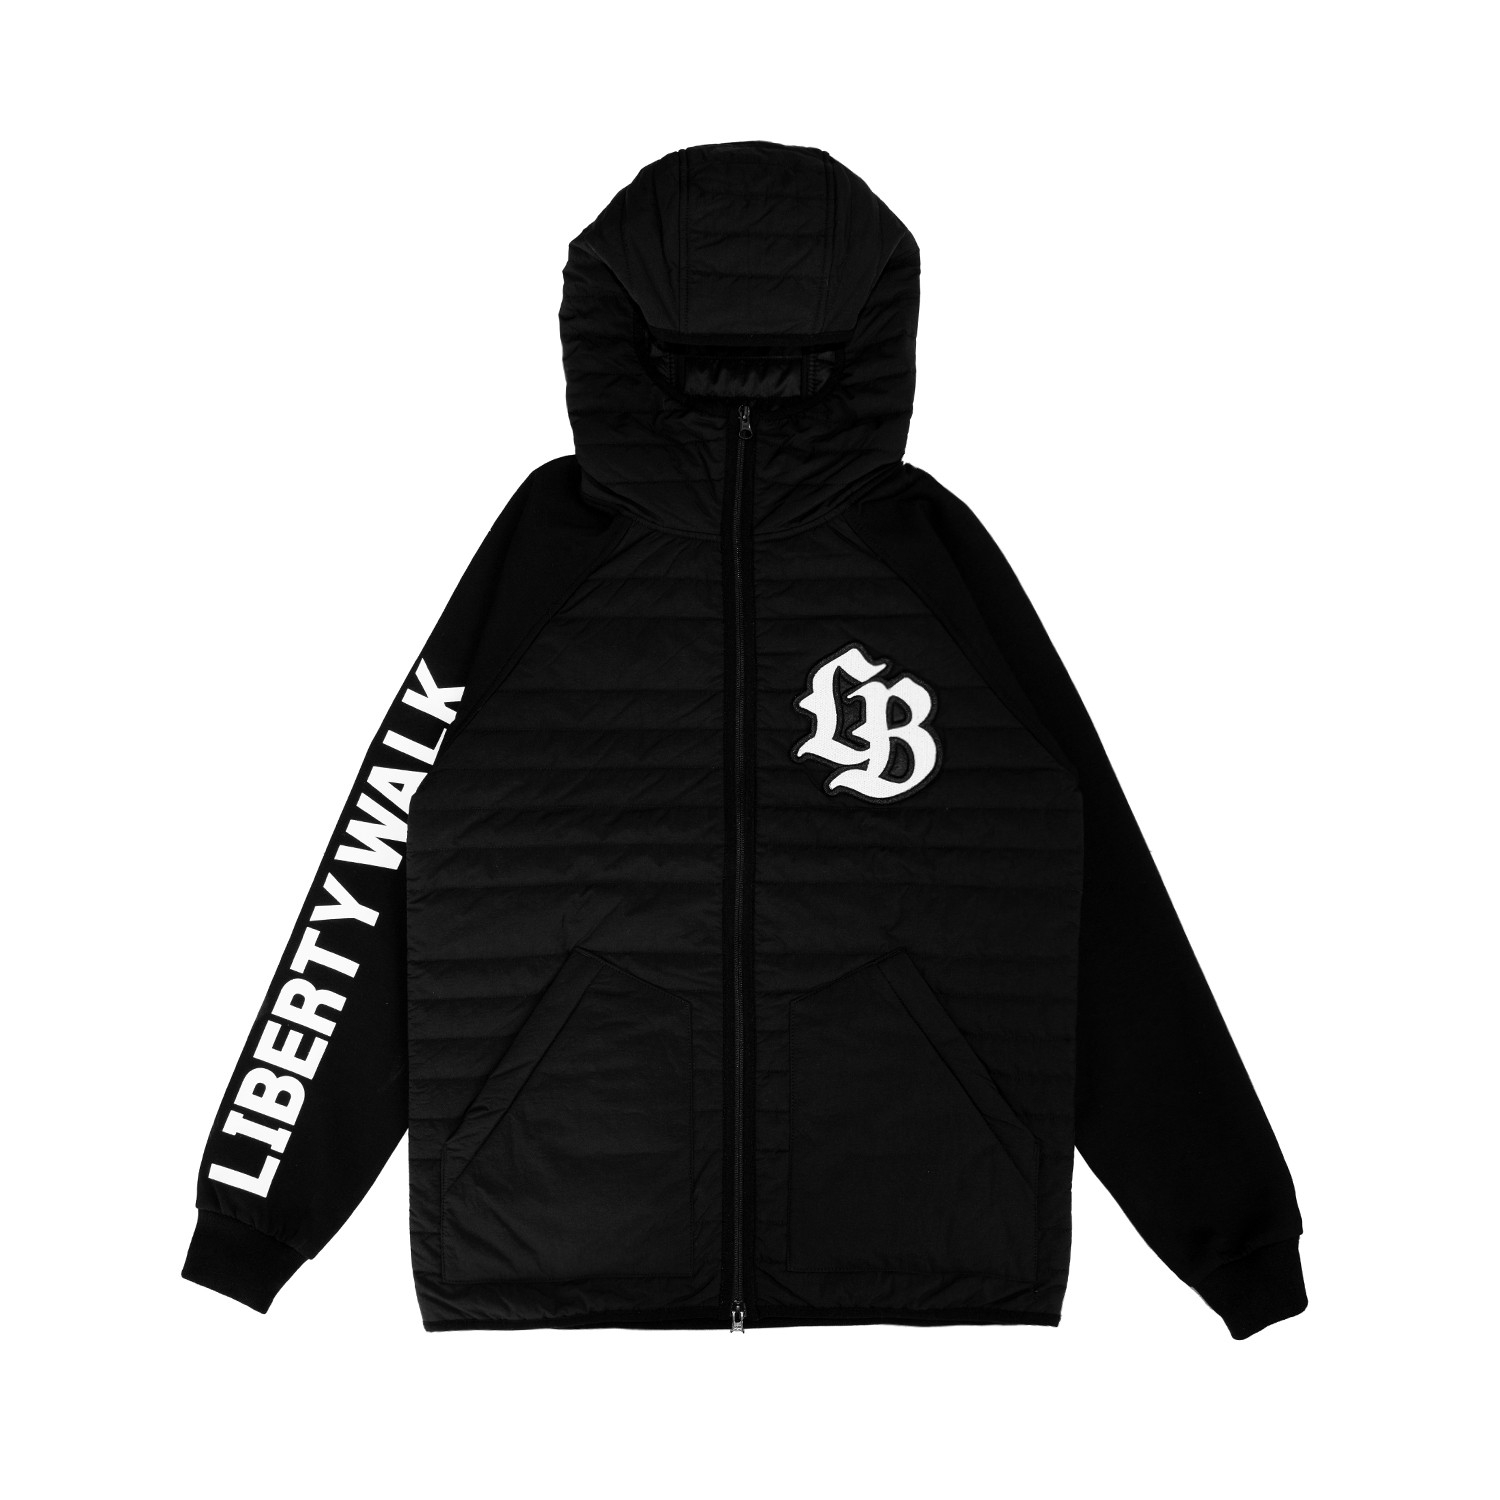 LB Quilted Hoodie Jacket Black - LB-ONLINE STORE